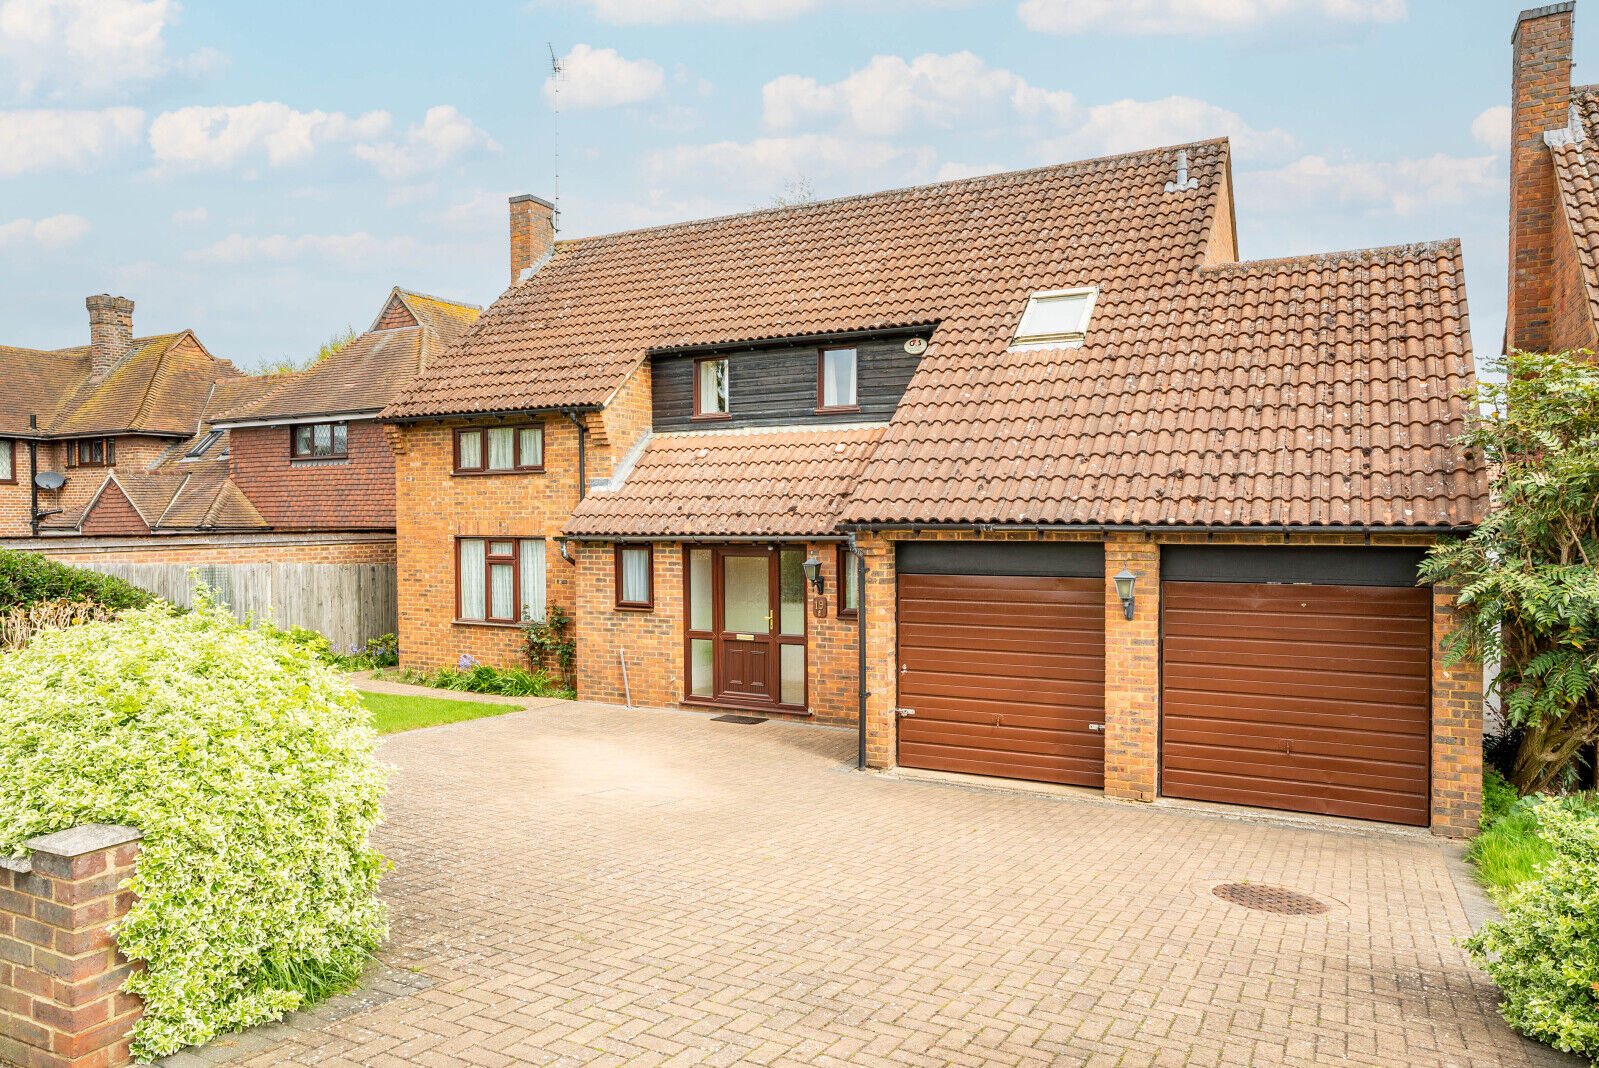 4 bedroom detached house for sale Marford Road, Wheathampstead, AL4, main image